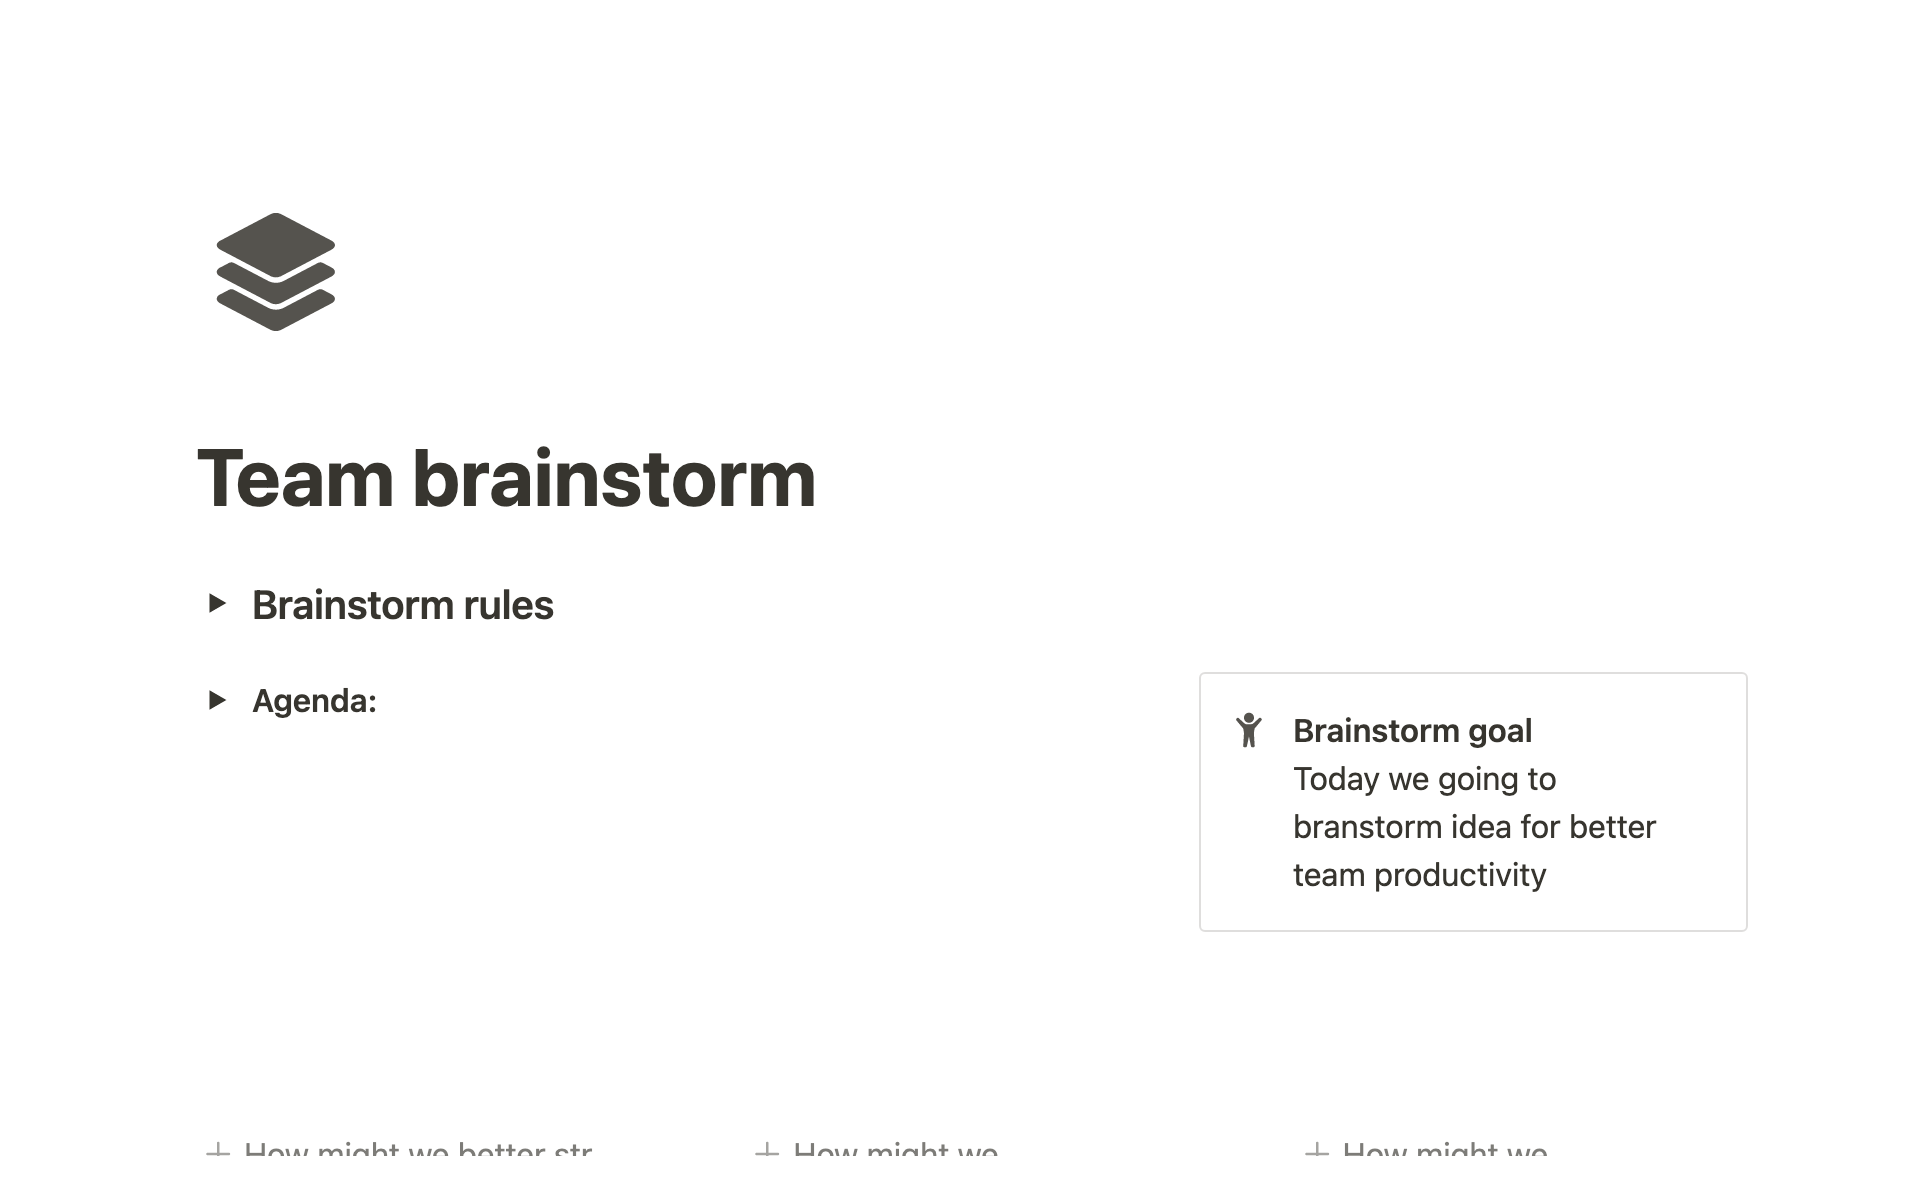 Efficiently manage your brainstorming sessions with all-in-one Notion template, featuring brainstorm rules, an agenda, a goal section, a brainstorm post-it, and a task tracker for next steps.